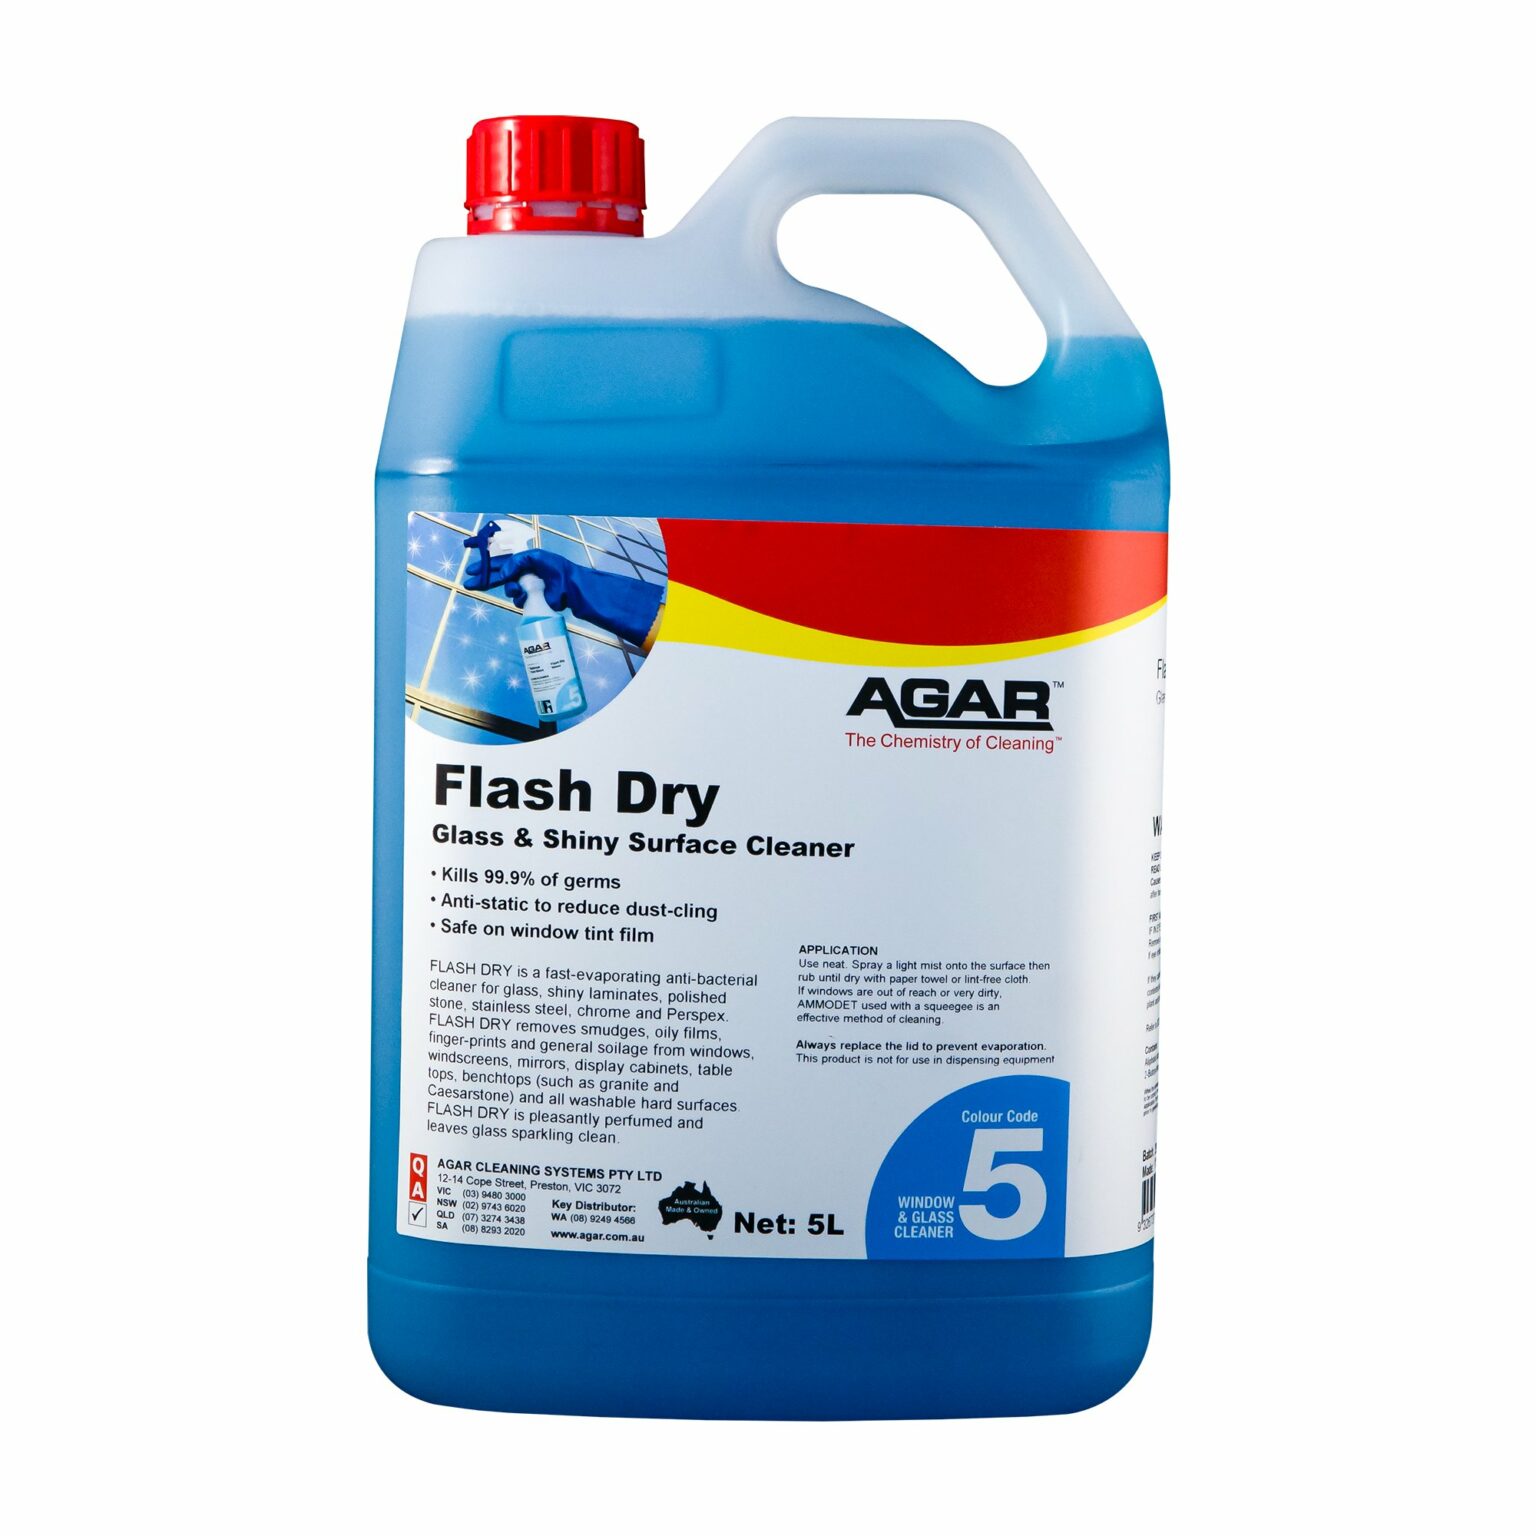 Agar Flash Dry Glass and Shiny Surface Cleaner, 5L